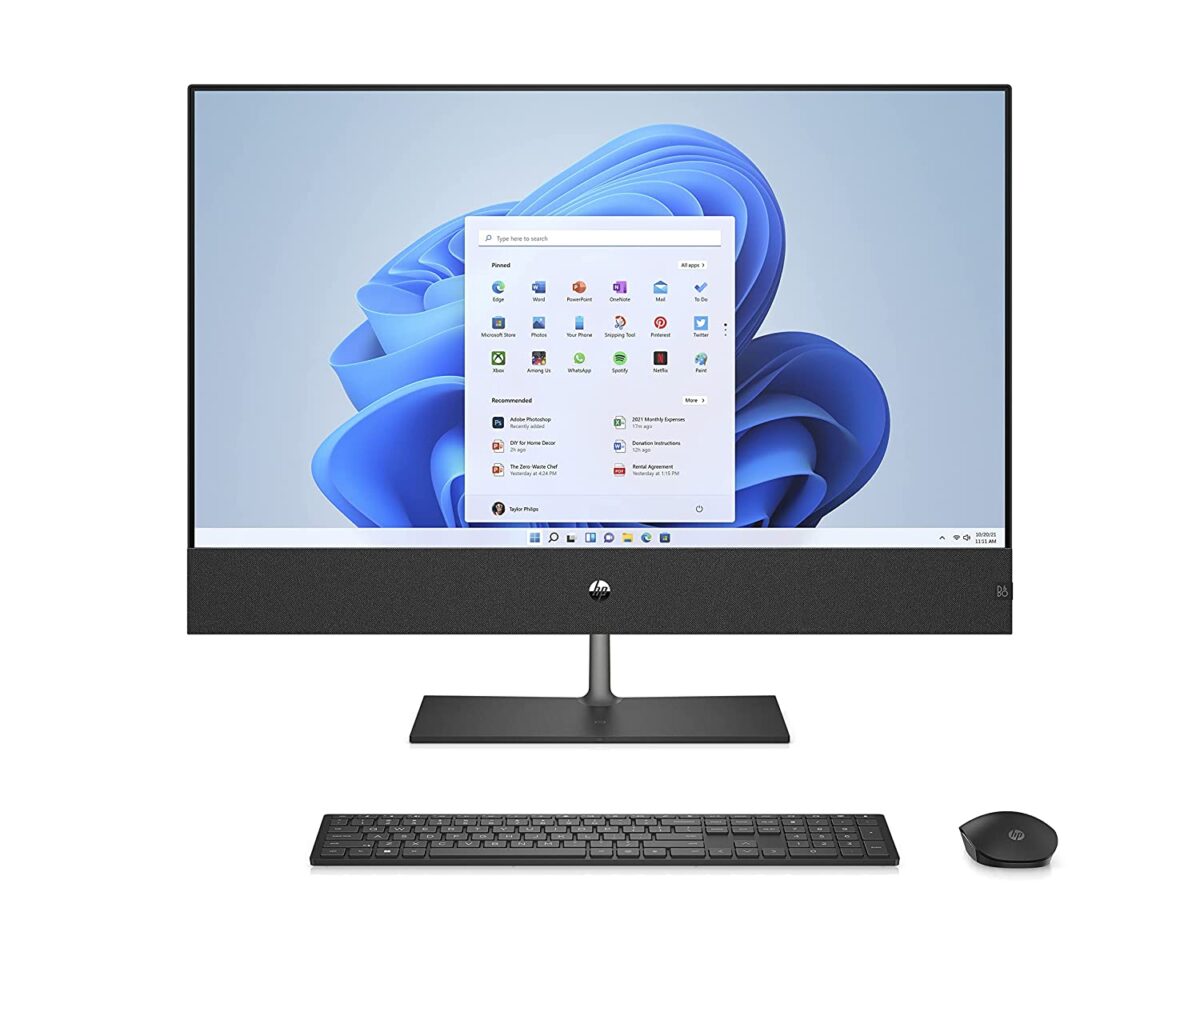 HP Pavilion 32-b0390in 31.5 All-in-One Desktop PC Launched in India ( 12th Gen Intel Core i5-12400T )